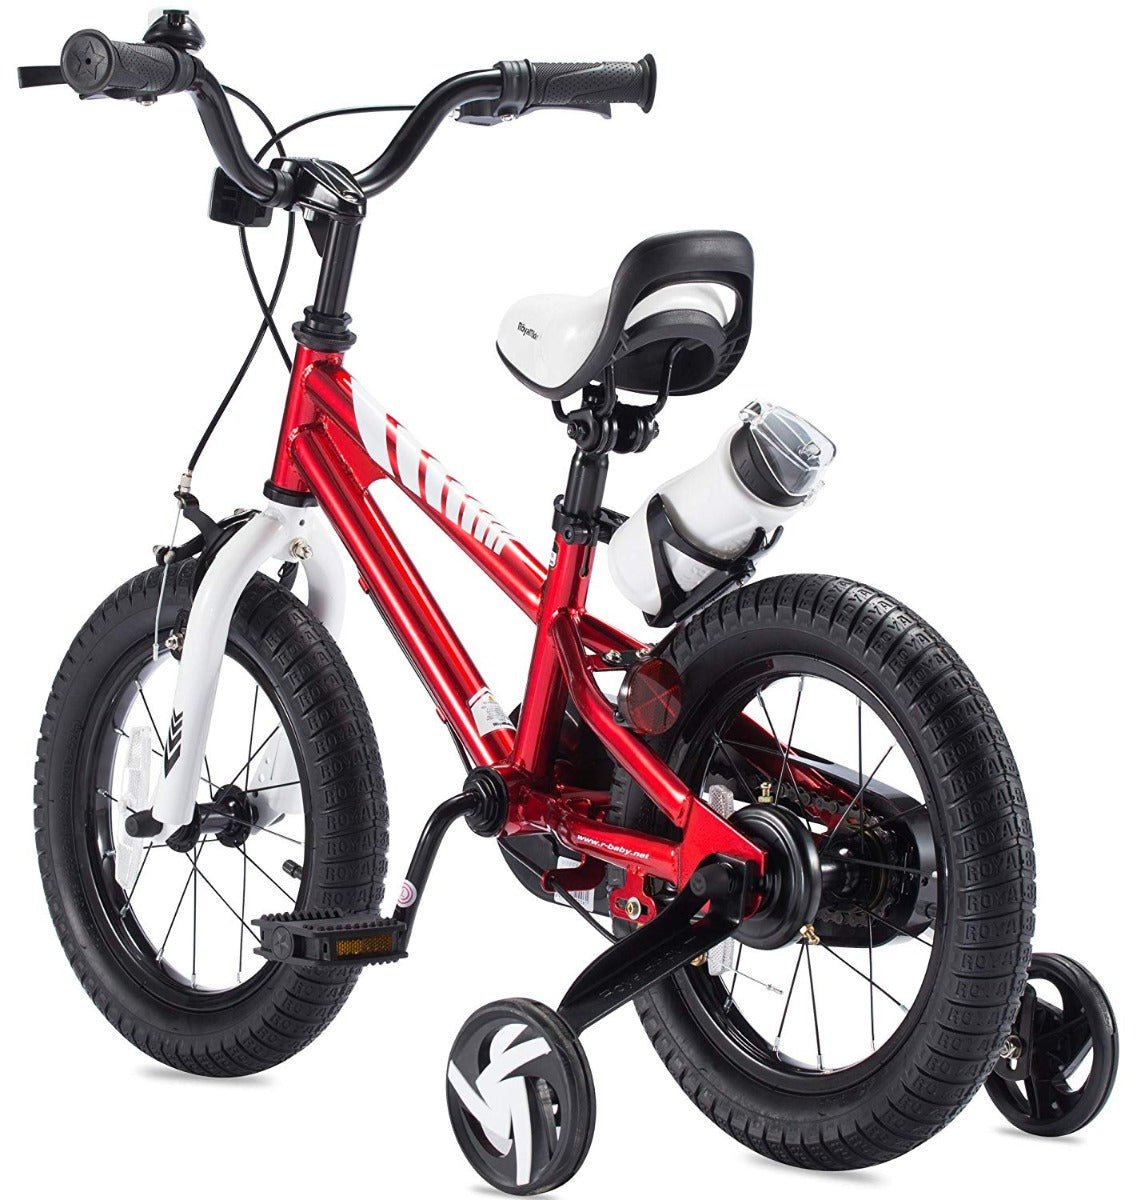 RoyalBaby Freestyle Children’s Pedal Bicycle & Stabilisers 16” Wheel - Red